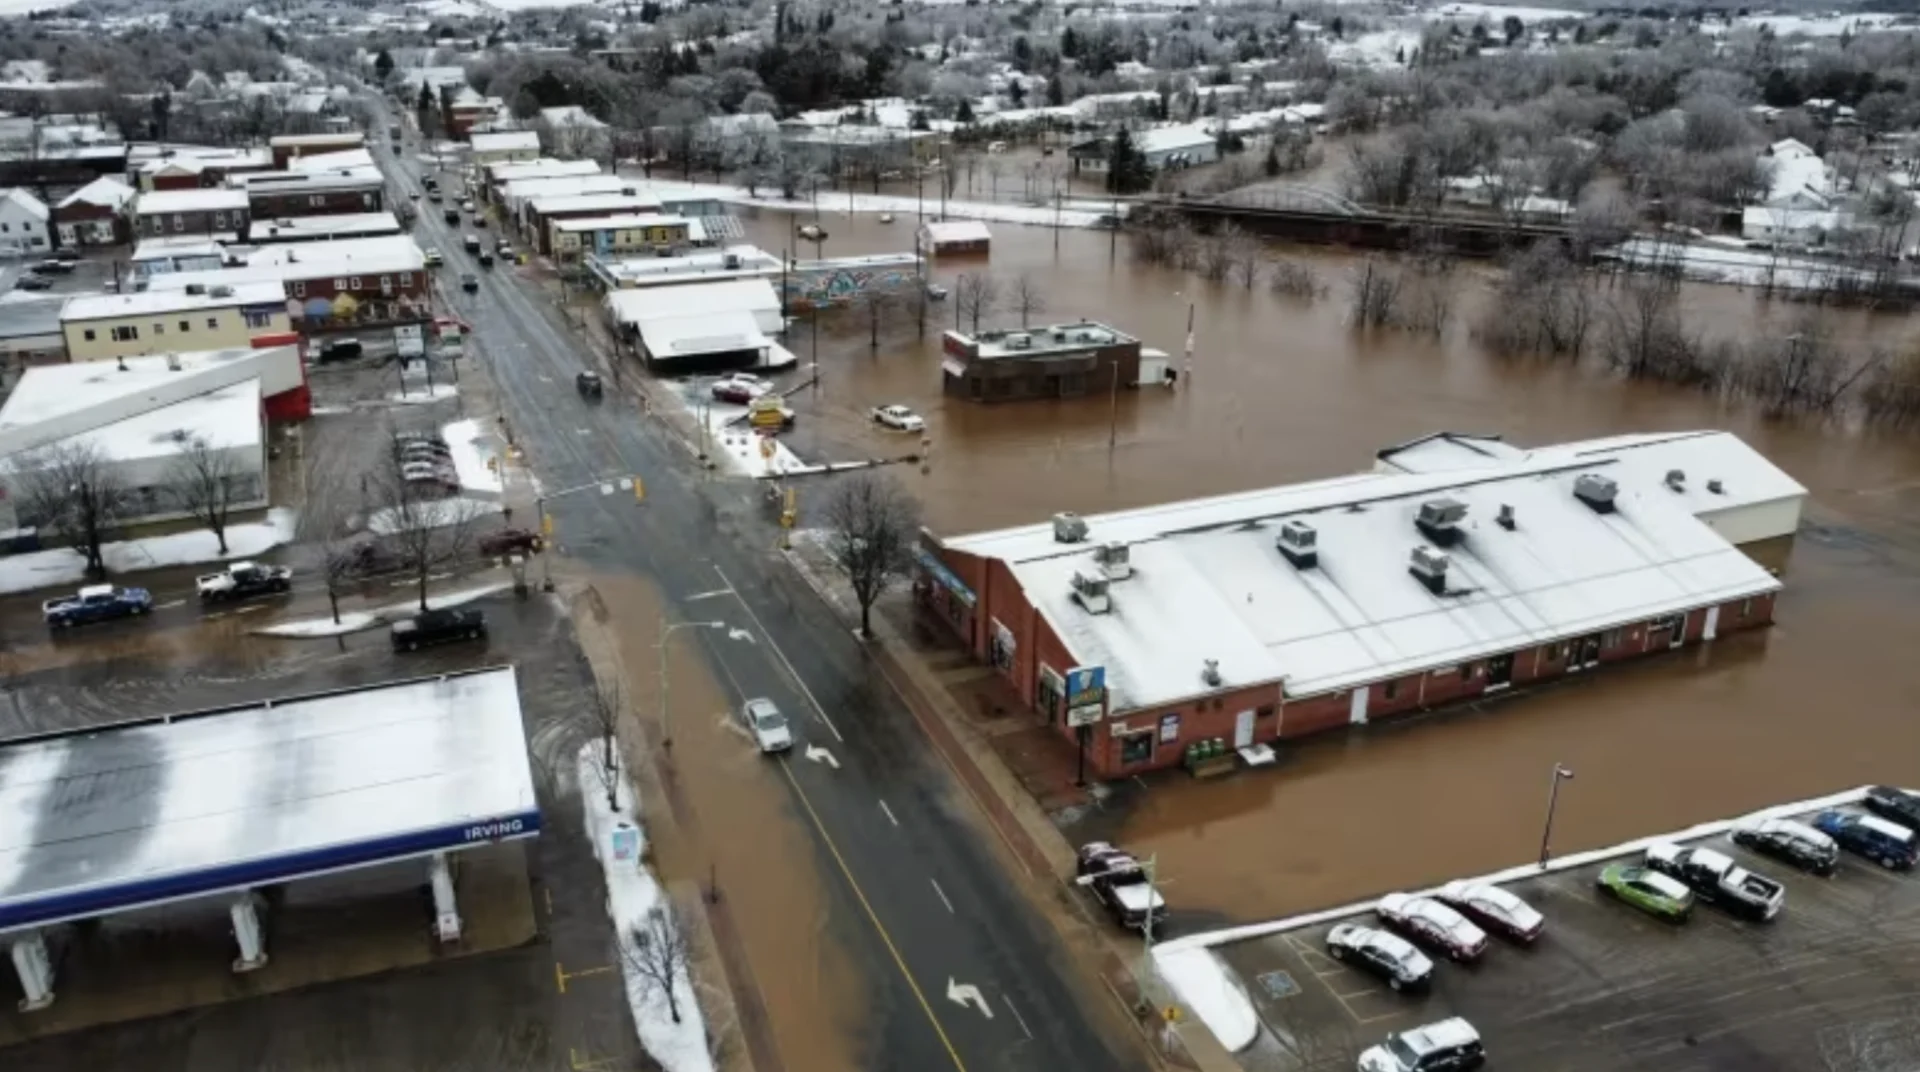 CBC: Sussex resident Luke Belyea went to check on his place of work Thursday morning and encountered flooding. Belyea flew his drone to get a better look. (Luke Belyea)